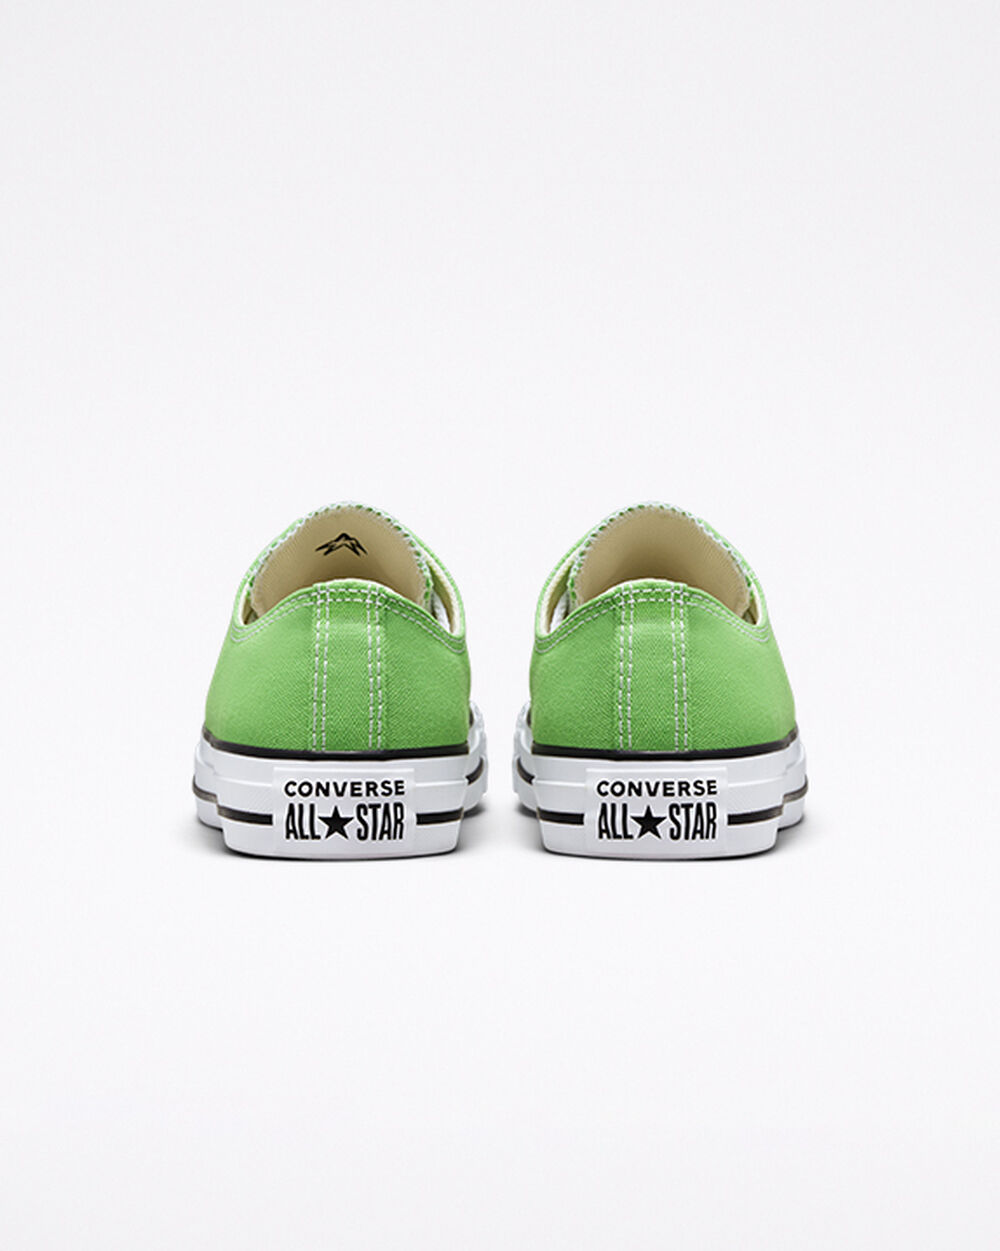 Tenis Converse Chuck Taylor All Star Mujer Verdes | Mexico-803756